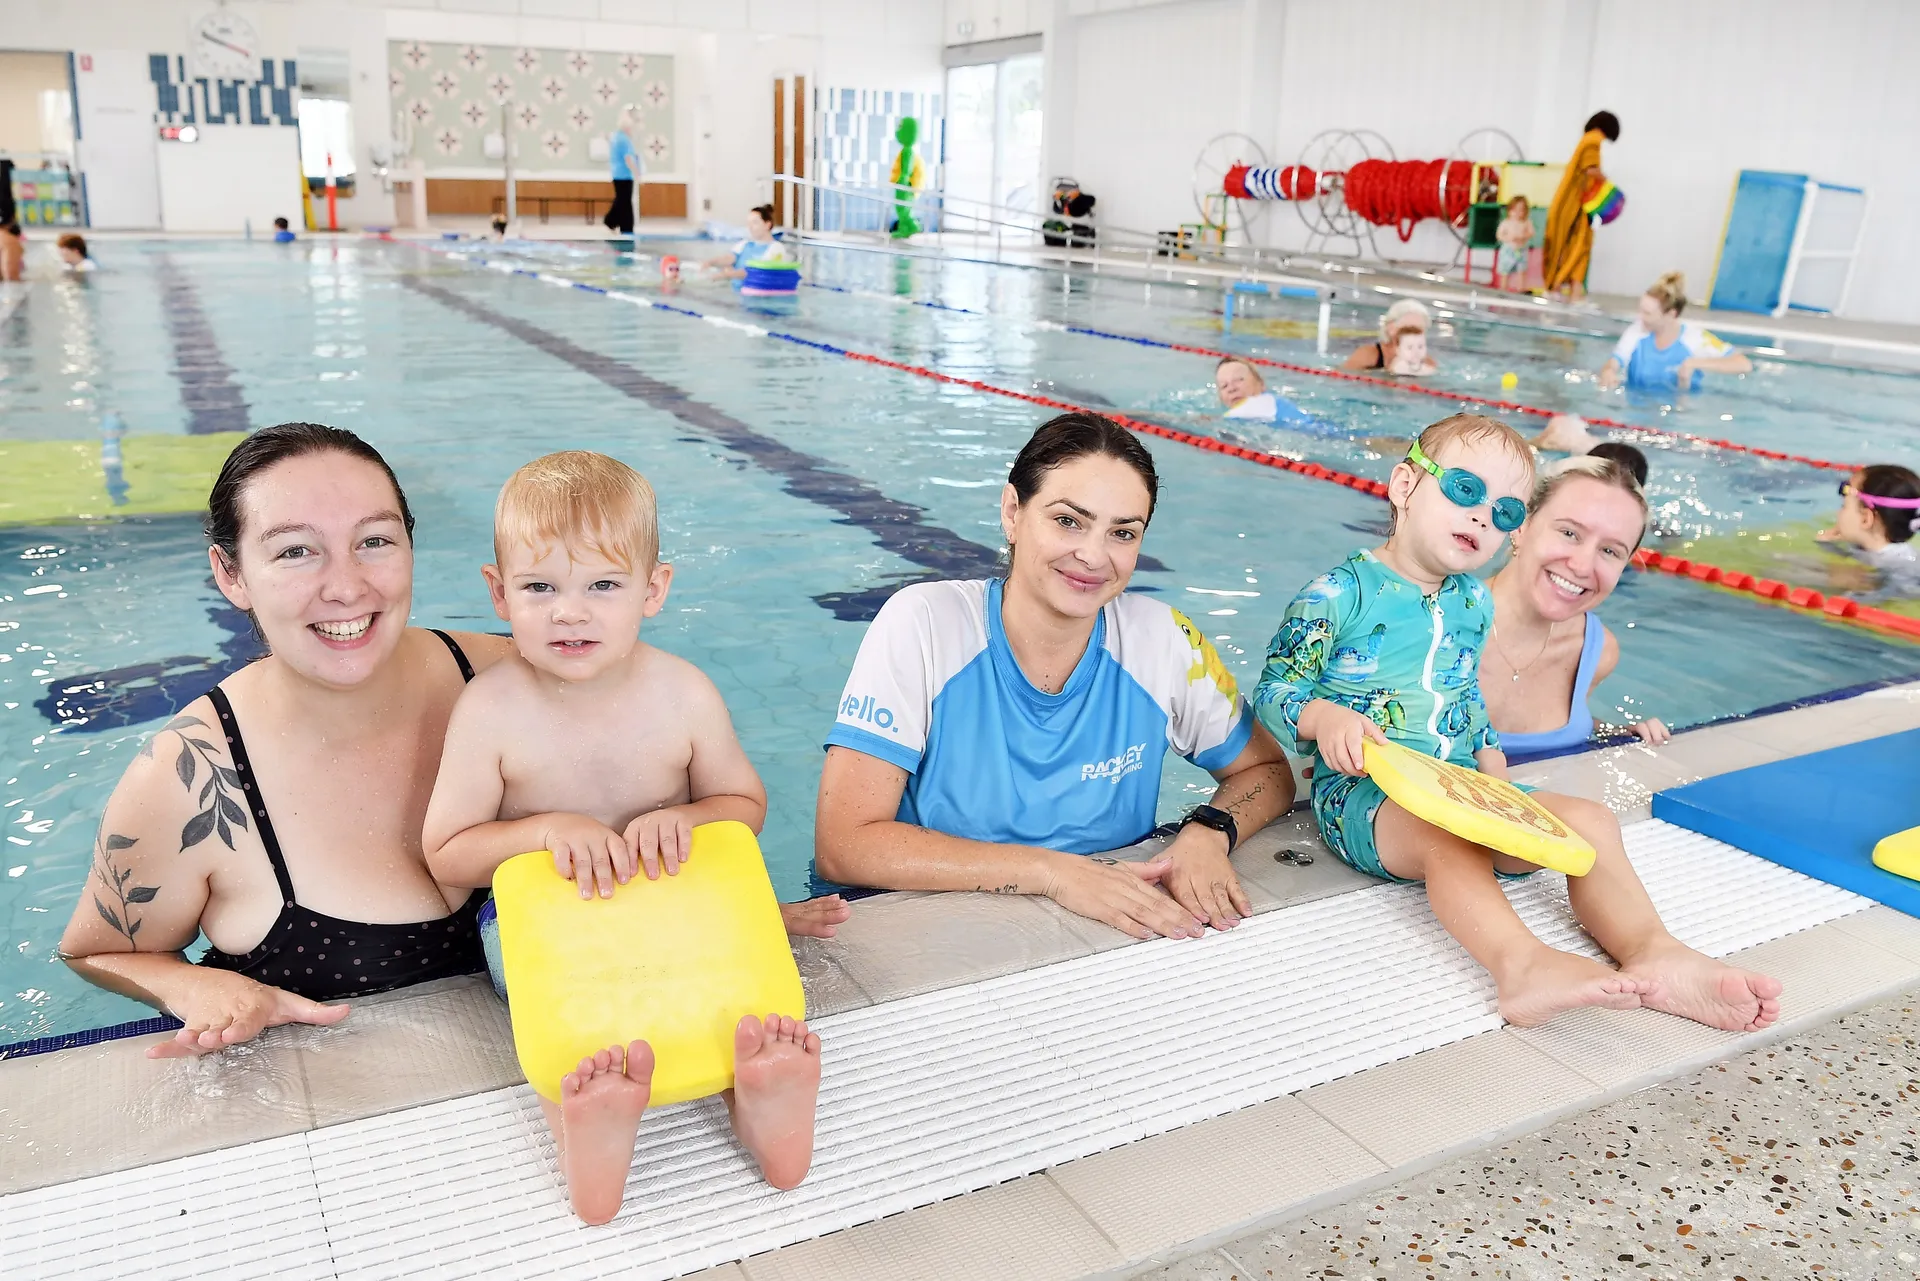 (Left to right) Rachel Turnbull with her son Jacob, Rackley Swimming Instructor Latoya Rodriguez, and Paxton Ciseau with mum Melissa